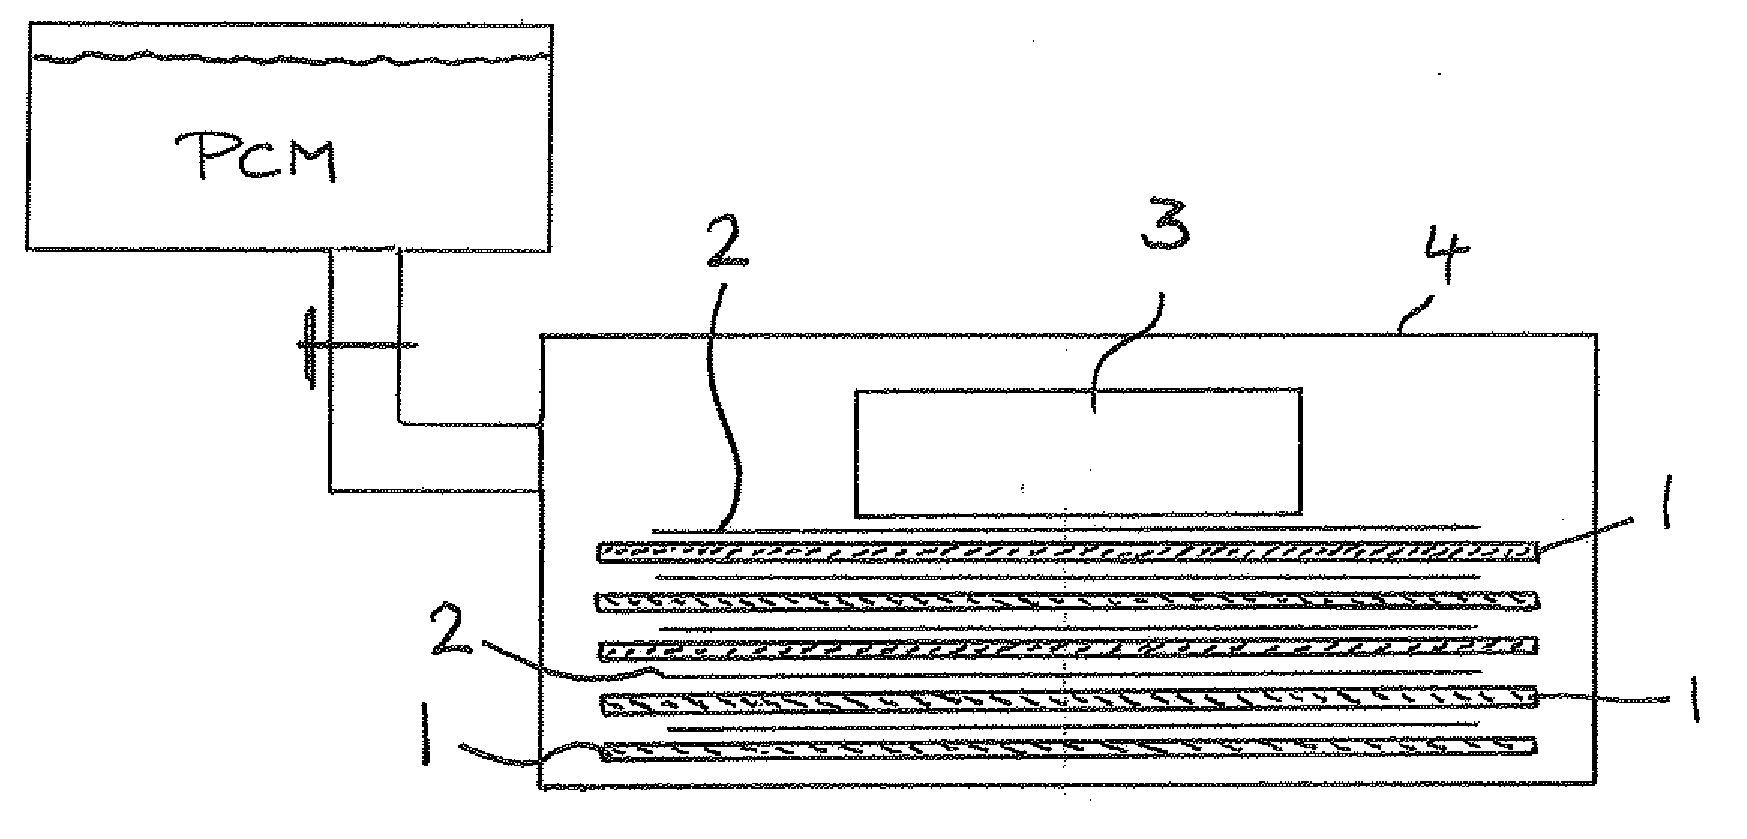 Latent heat storage device with phase change material and graphite matrix